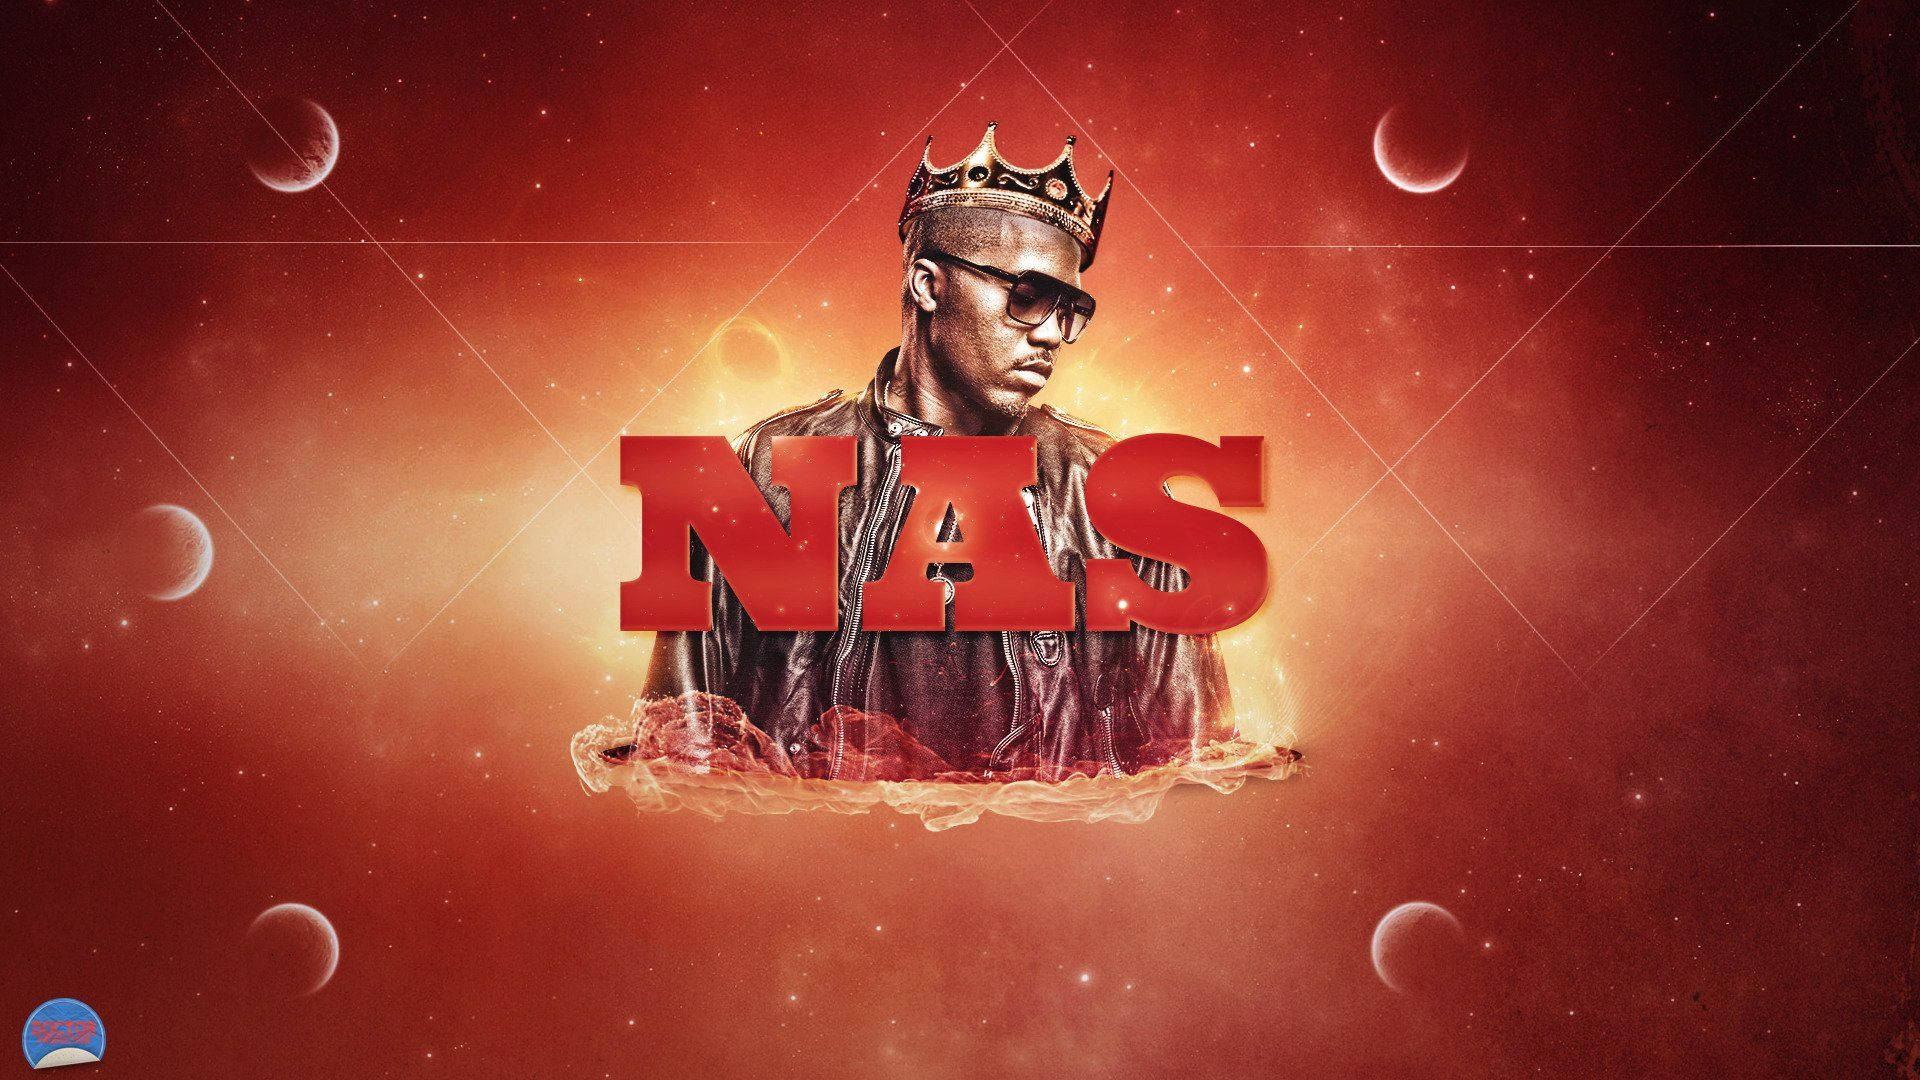 Hip Hop Royalty: Nas Donning a Crown Wallpaper